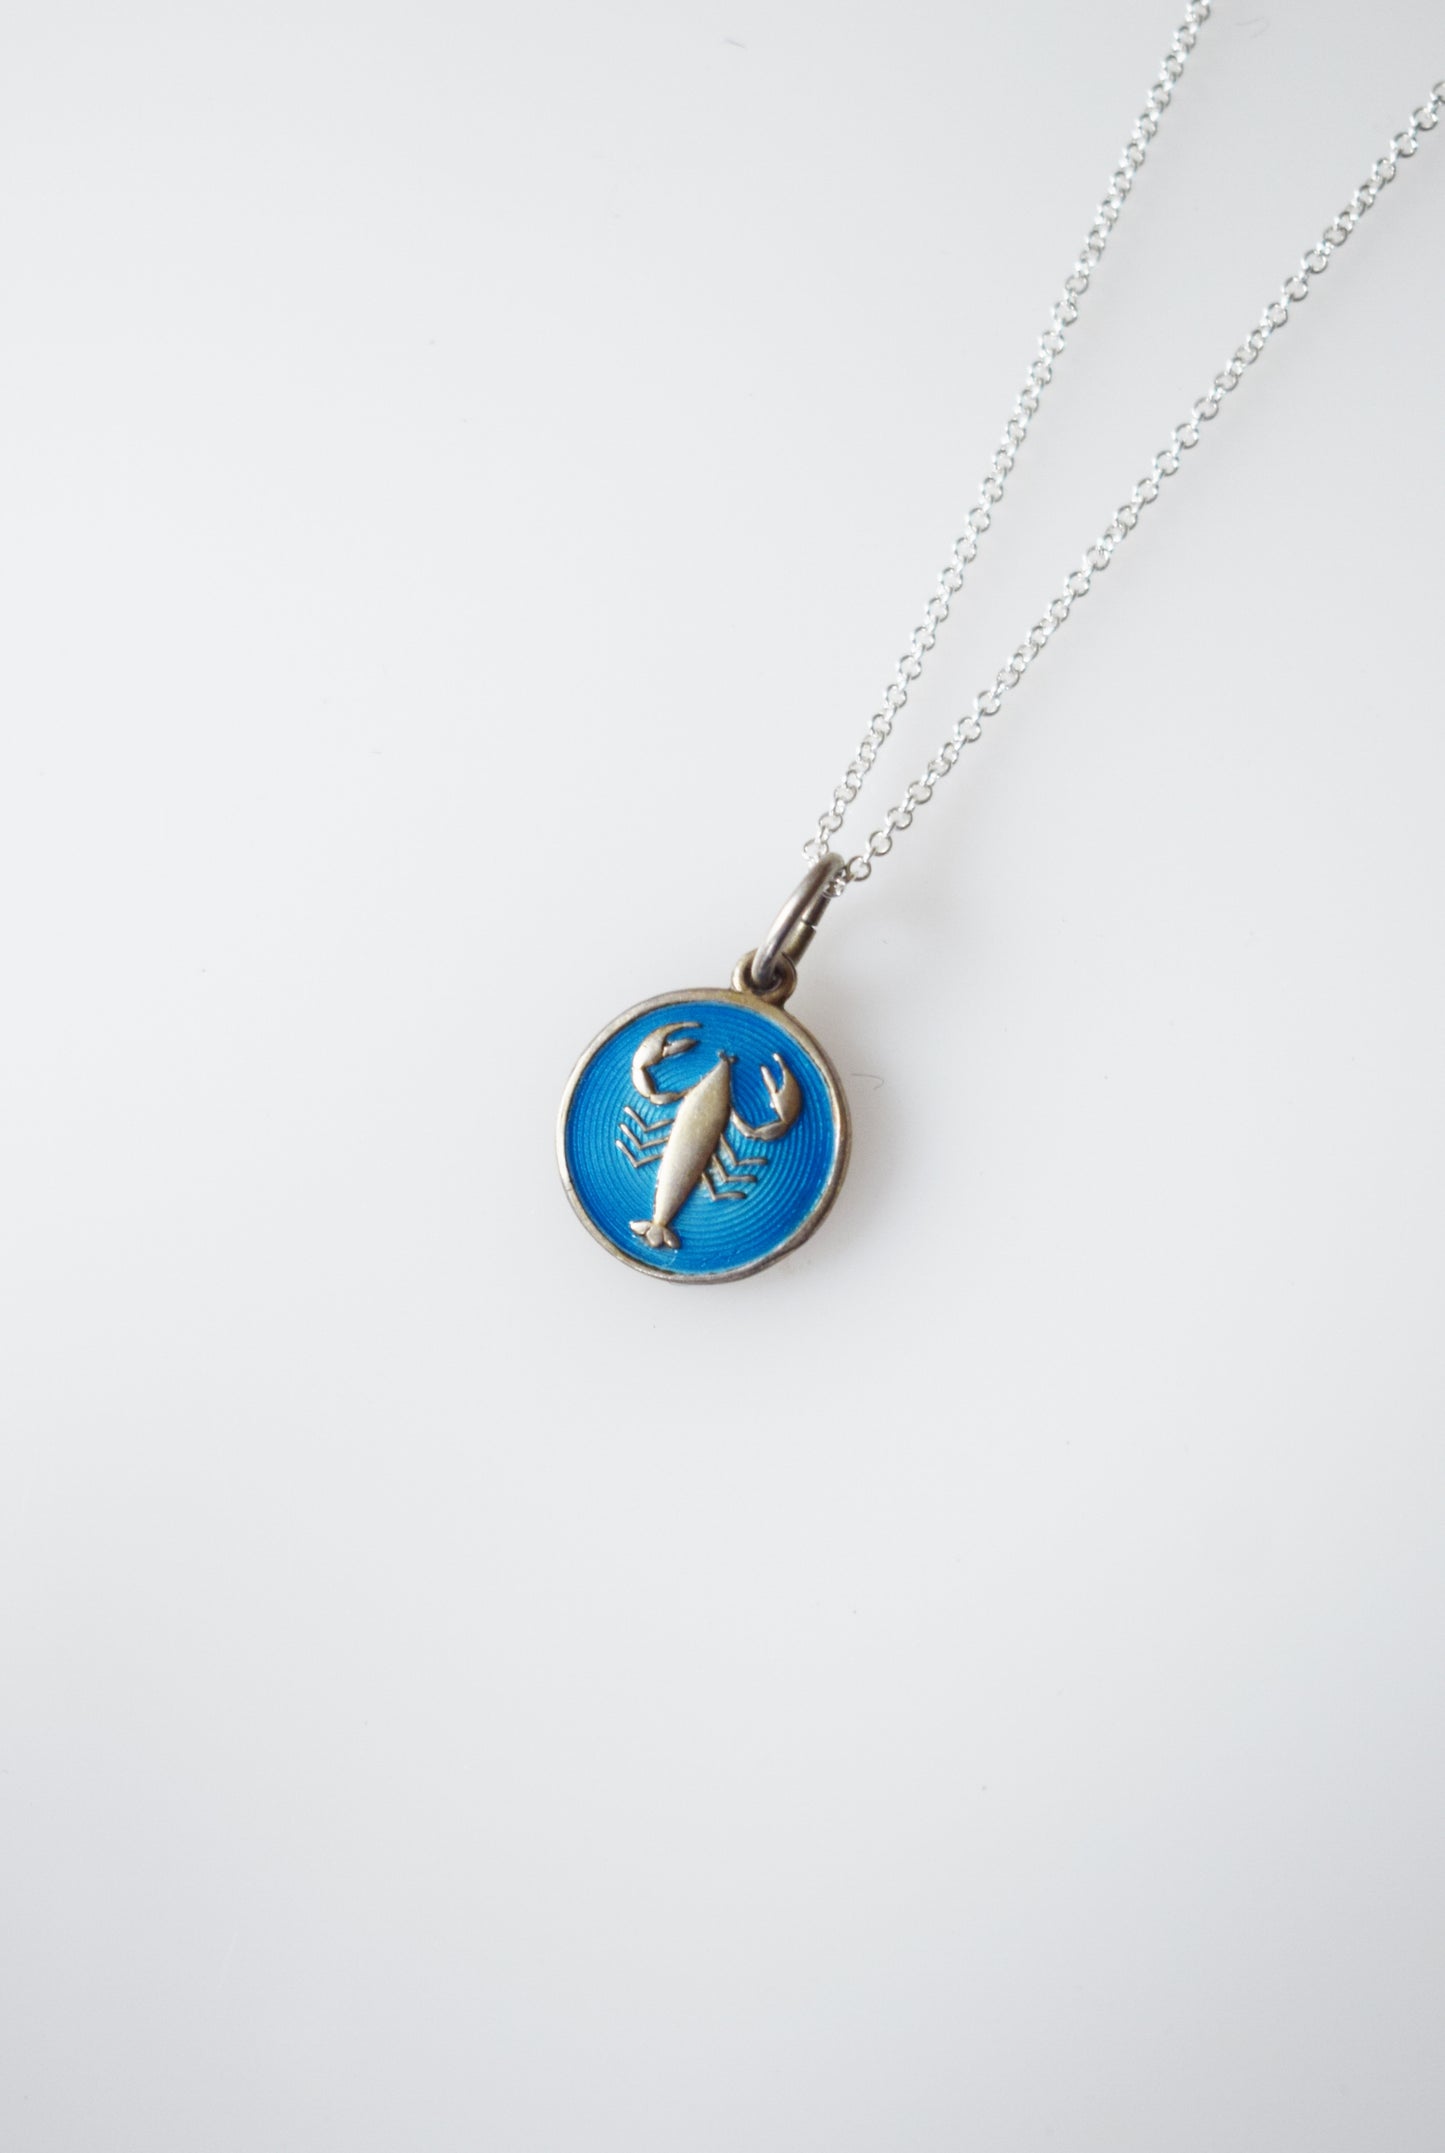 Vintage Sterling and Enamel Scorpio Charm Necklace